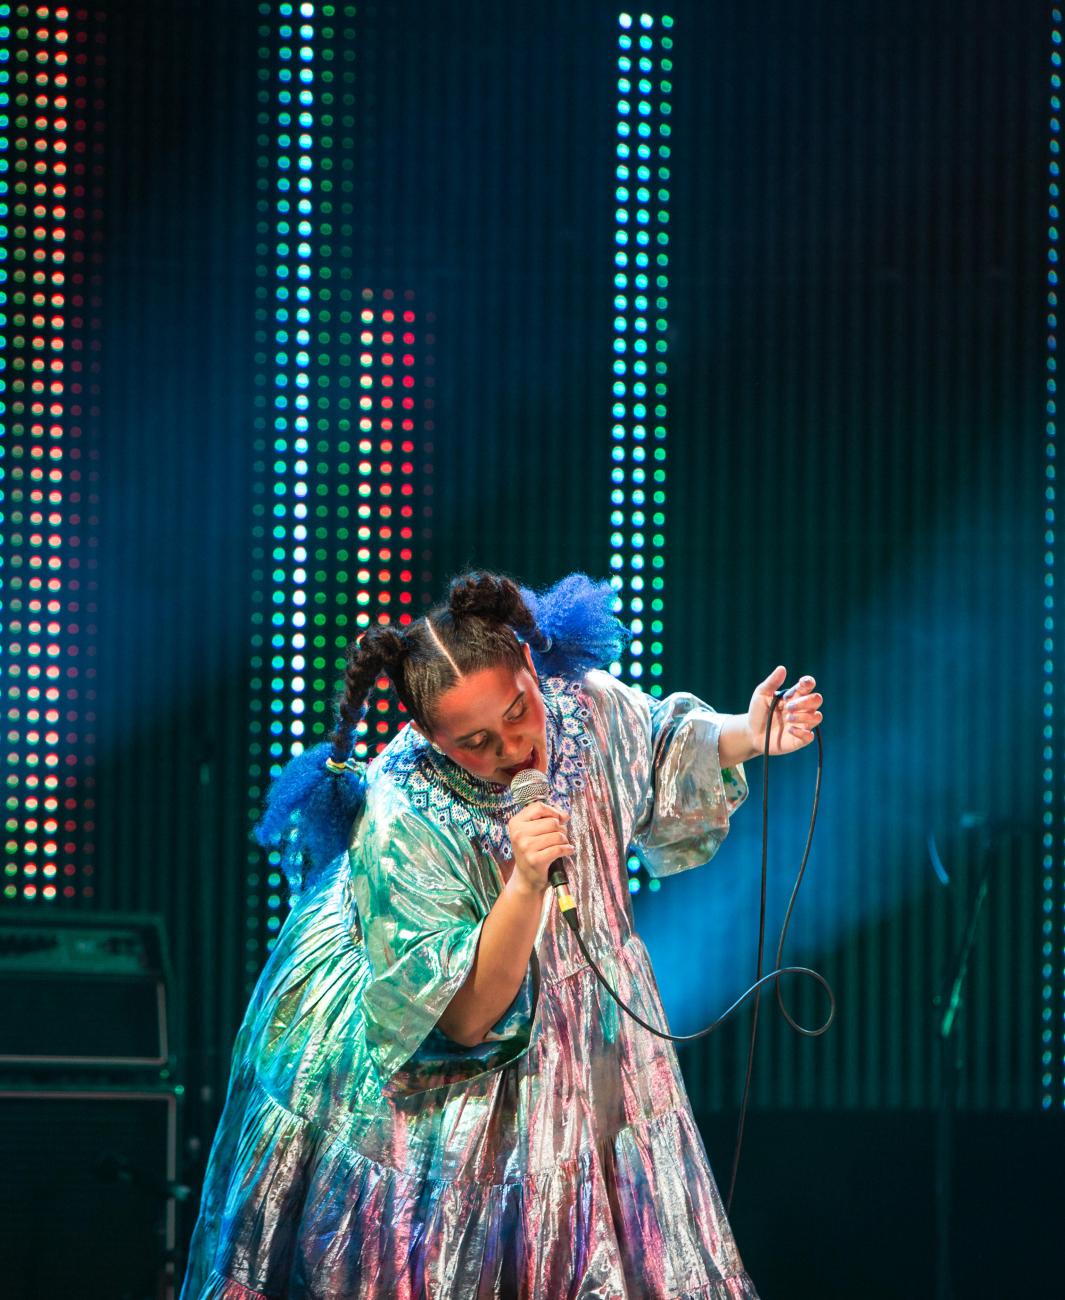 Lido Pimienta on stage in a multicoloured dress with her hair braided.